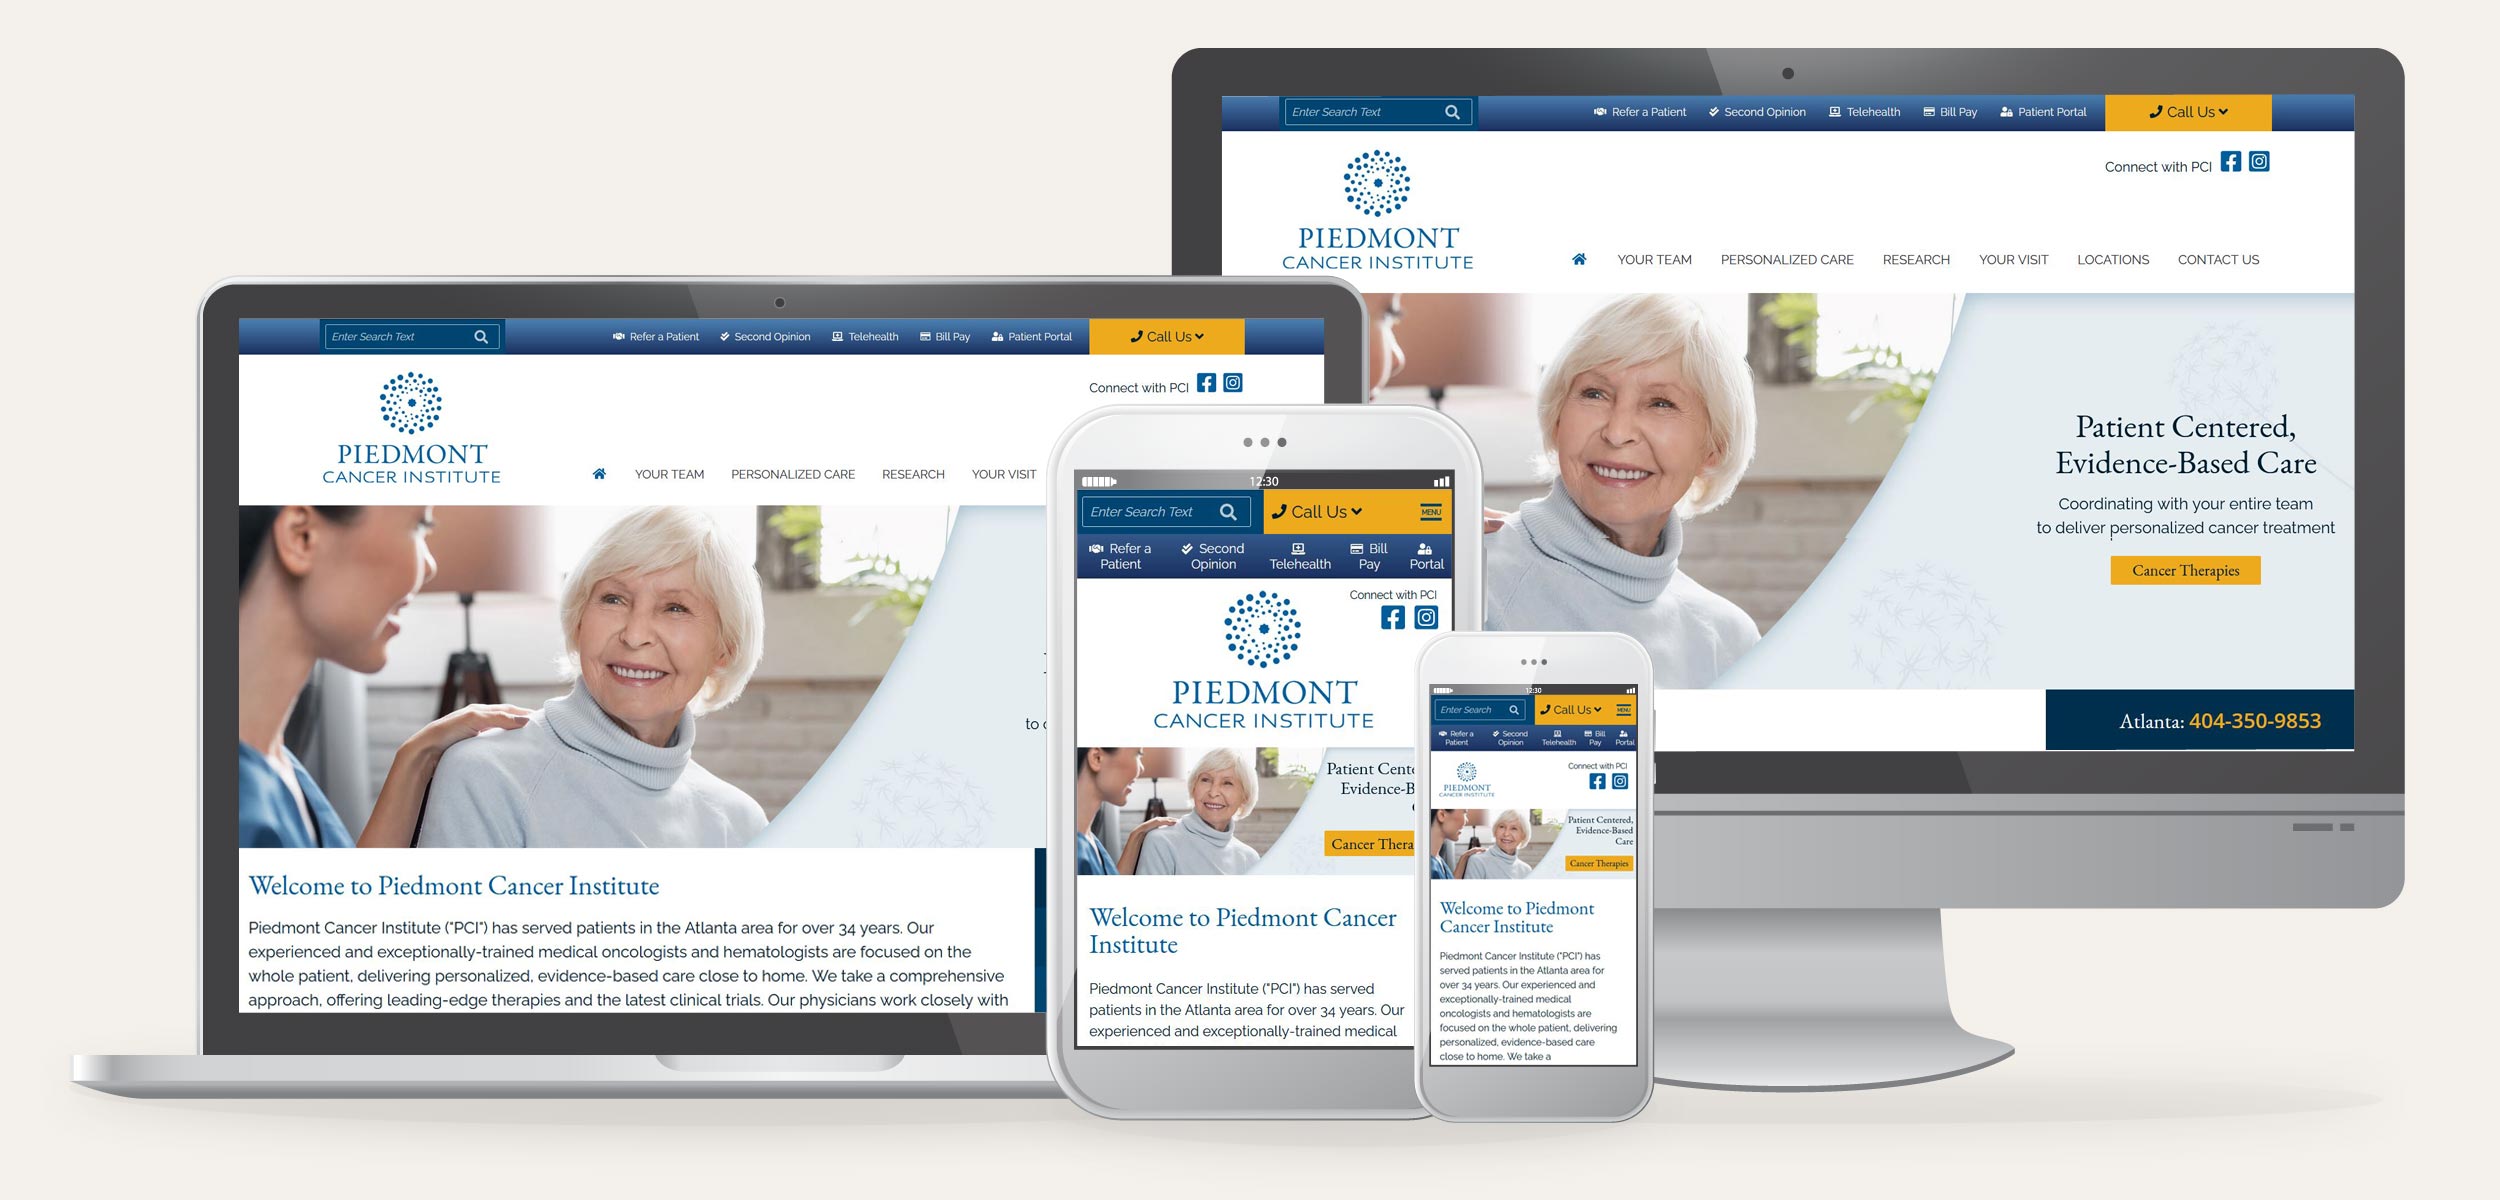 MMA developed the website for Piedmont Cancer Institute